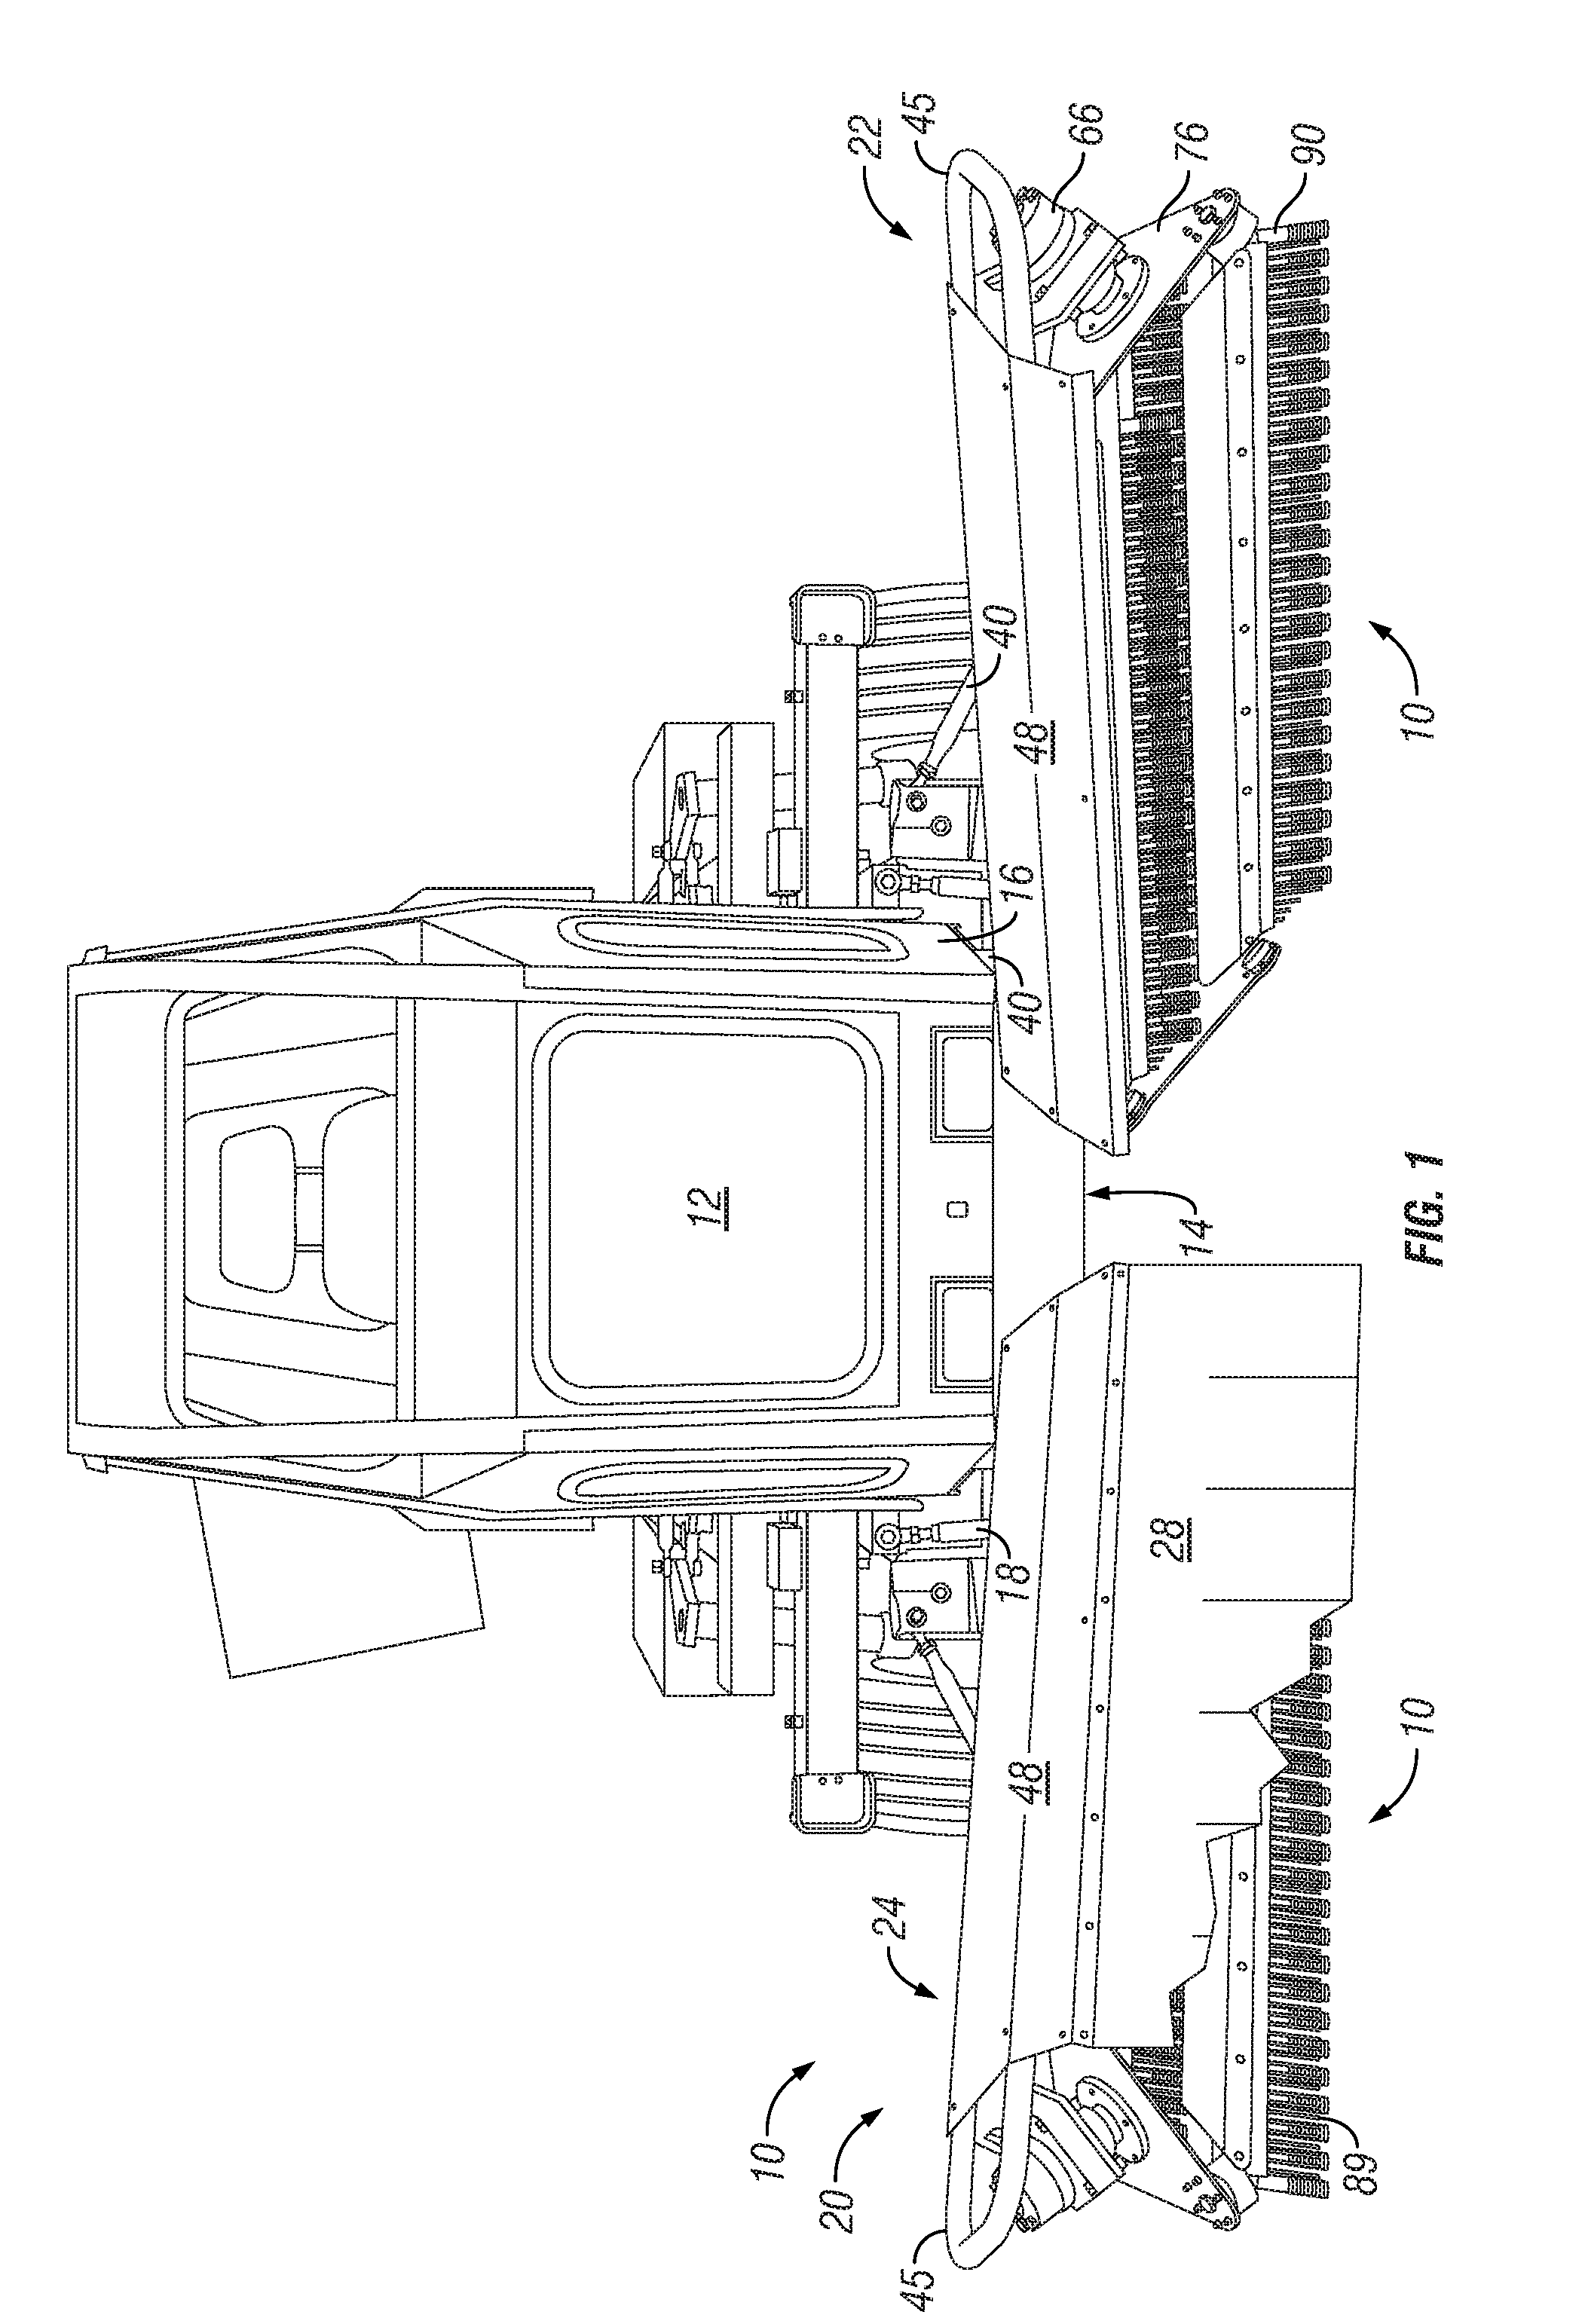 Harvest sweeper attachment system